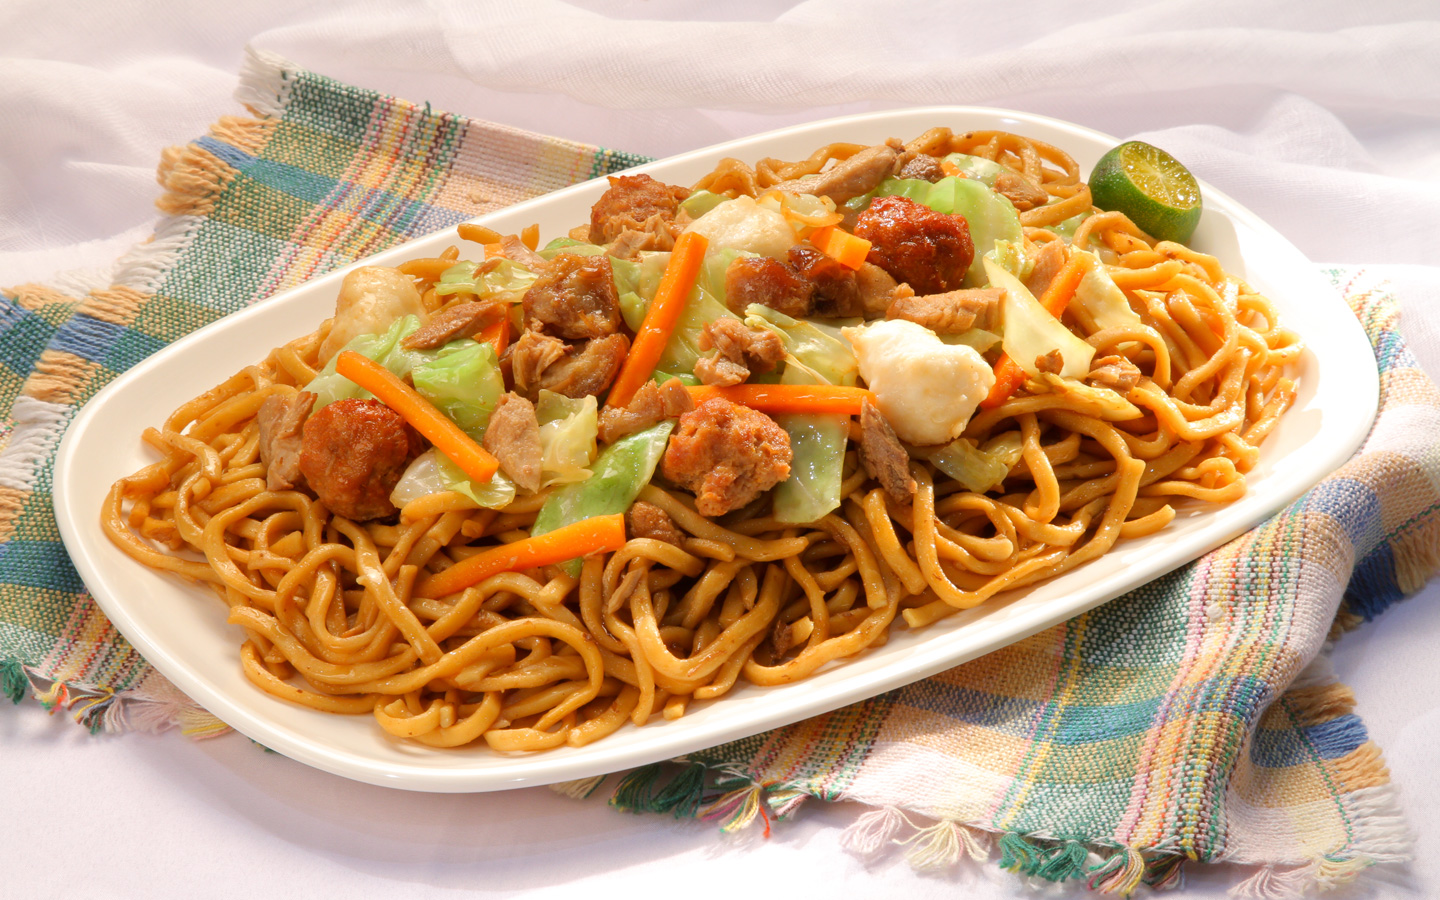 One reason why Filipinos put pancit or sometimes spaghetti on the dining ta...